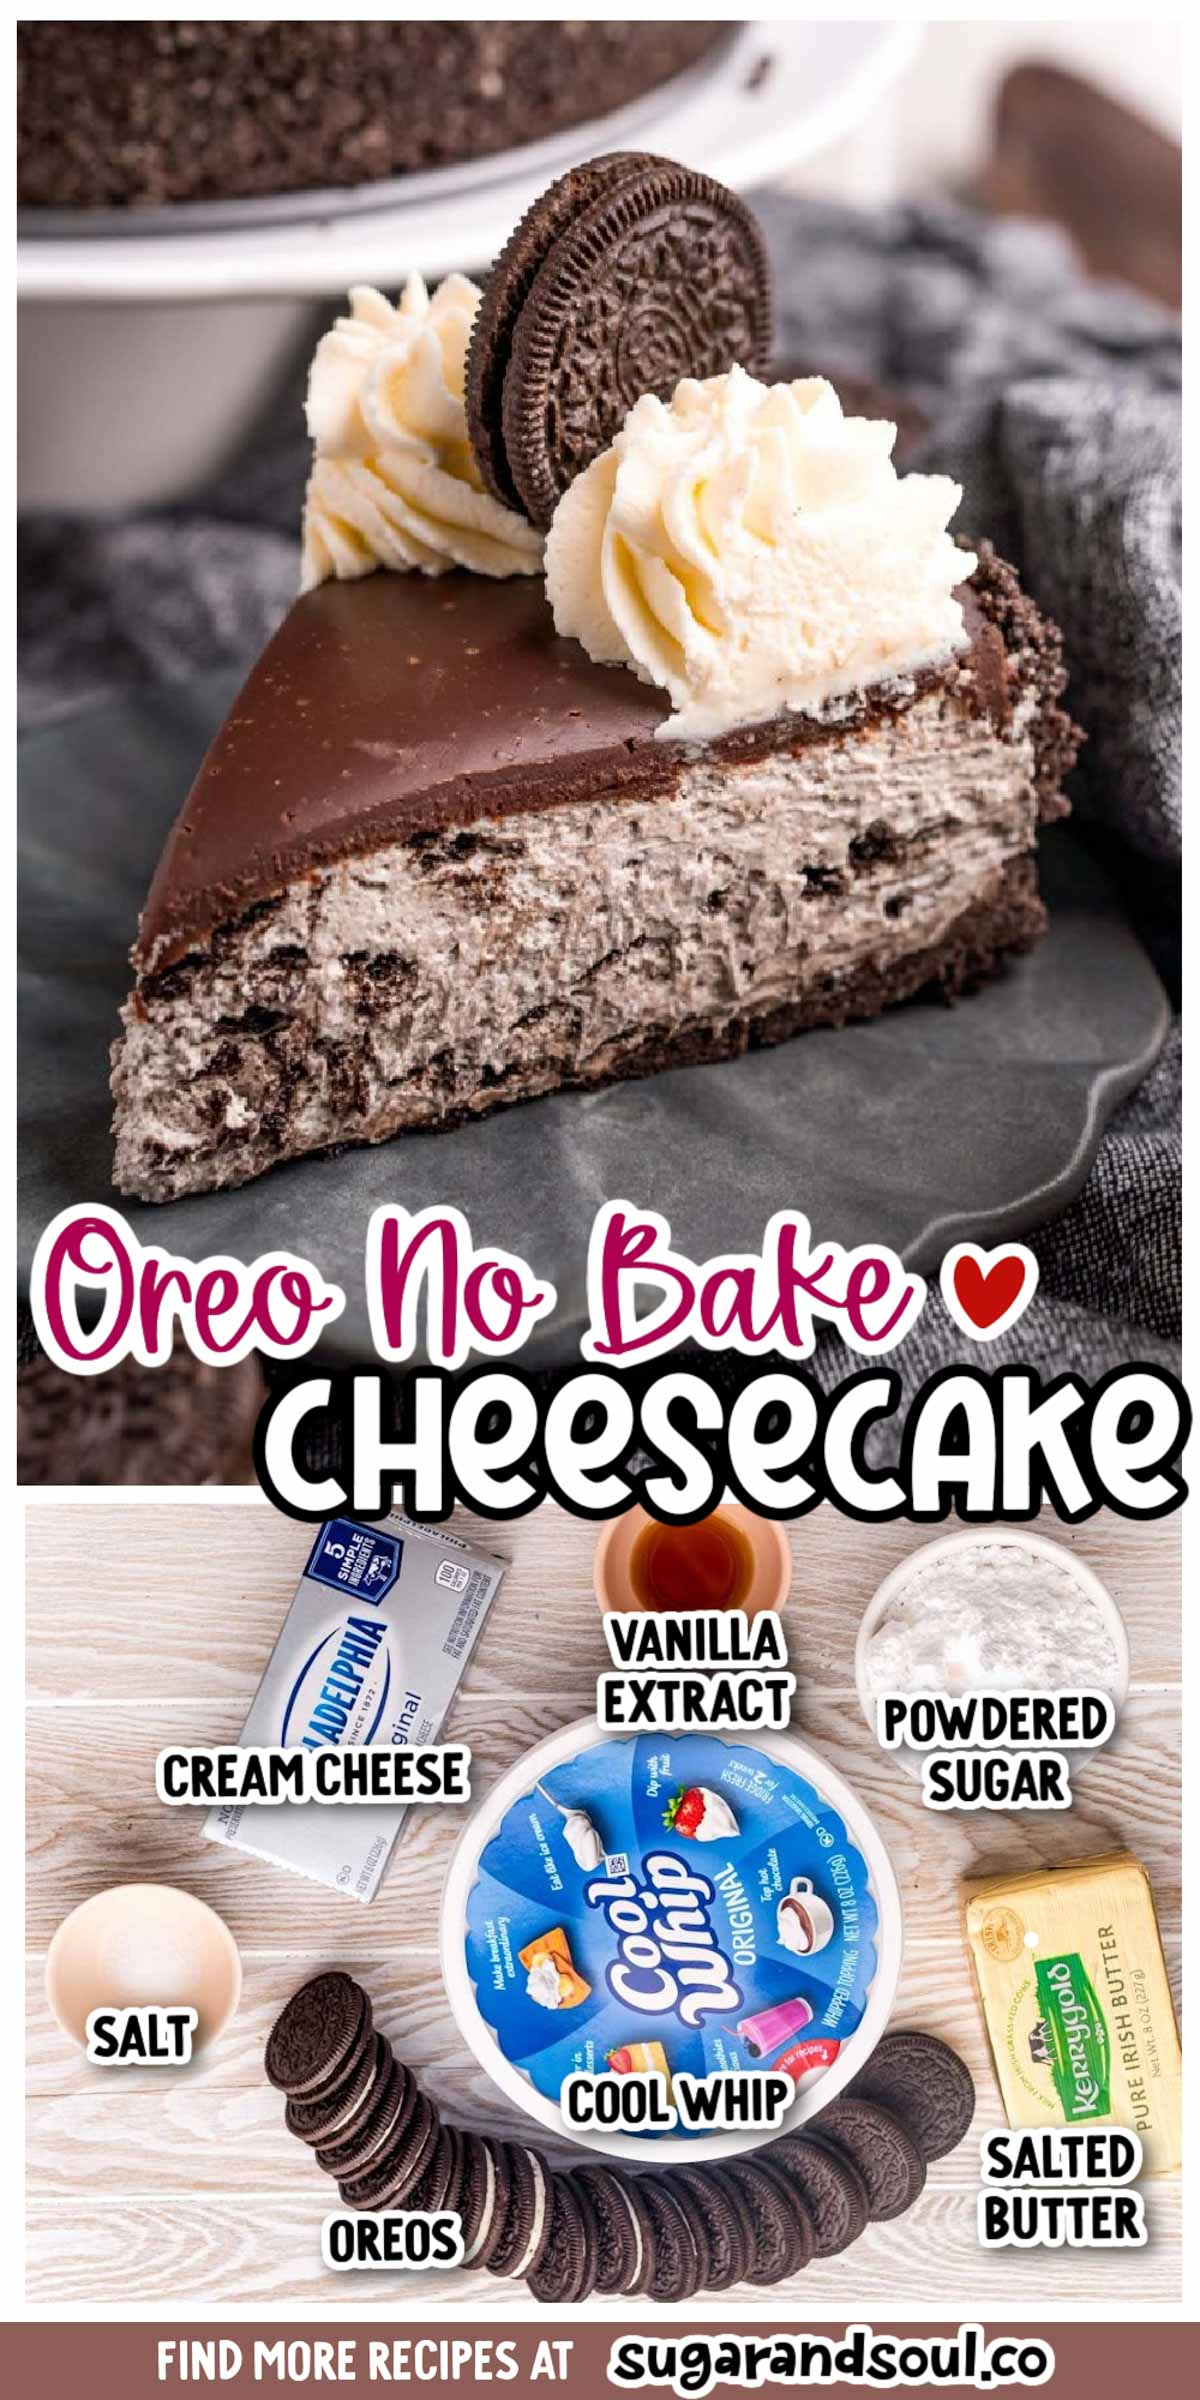 This No-Bake Oreo Cheese Cake has an Oreo cookie crust, creamy cheesecake filling loaded with crushed Oreos then topped with ganache! Prep this easy no-bake dessert in just 30 minutes! via @sugarandsoulco